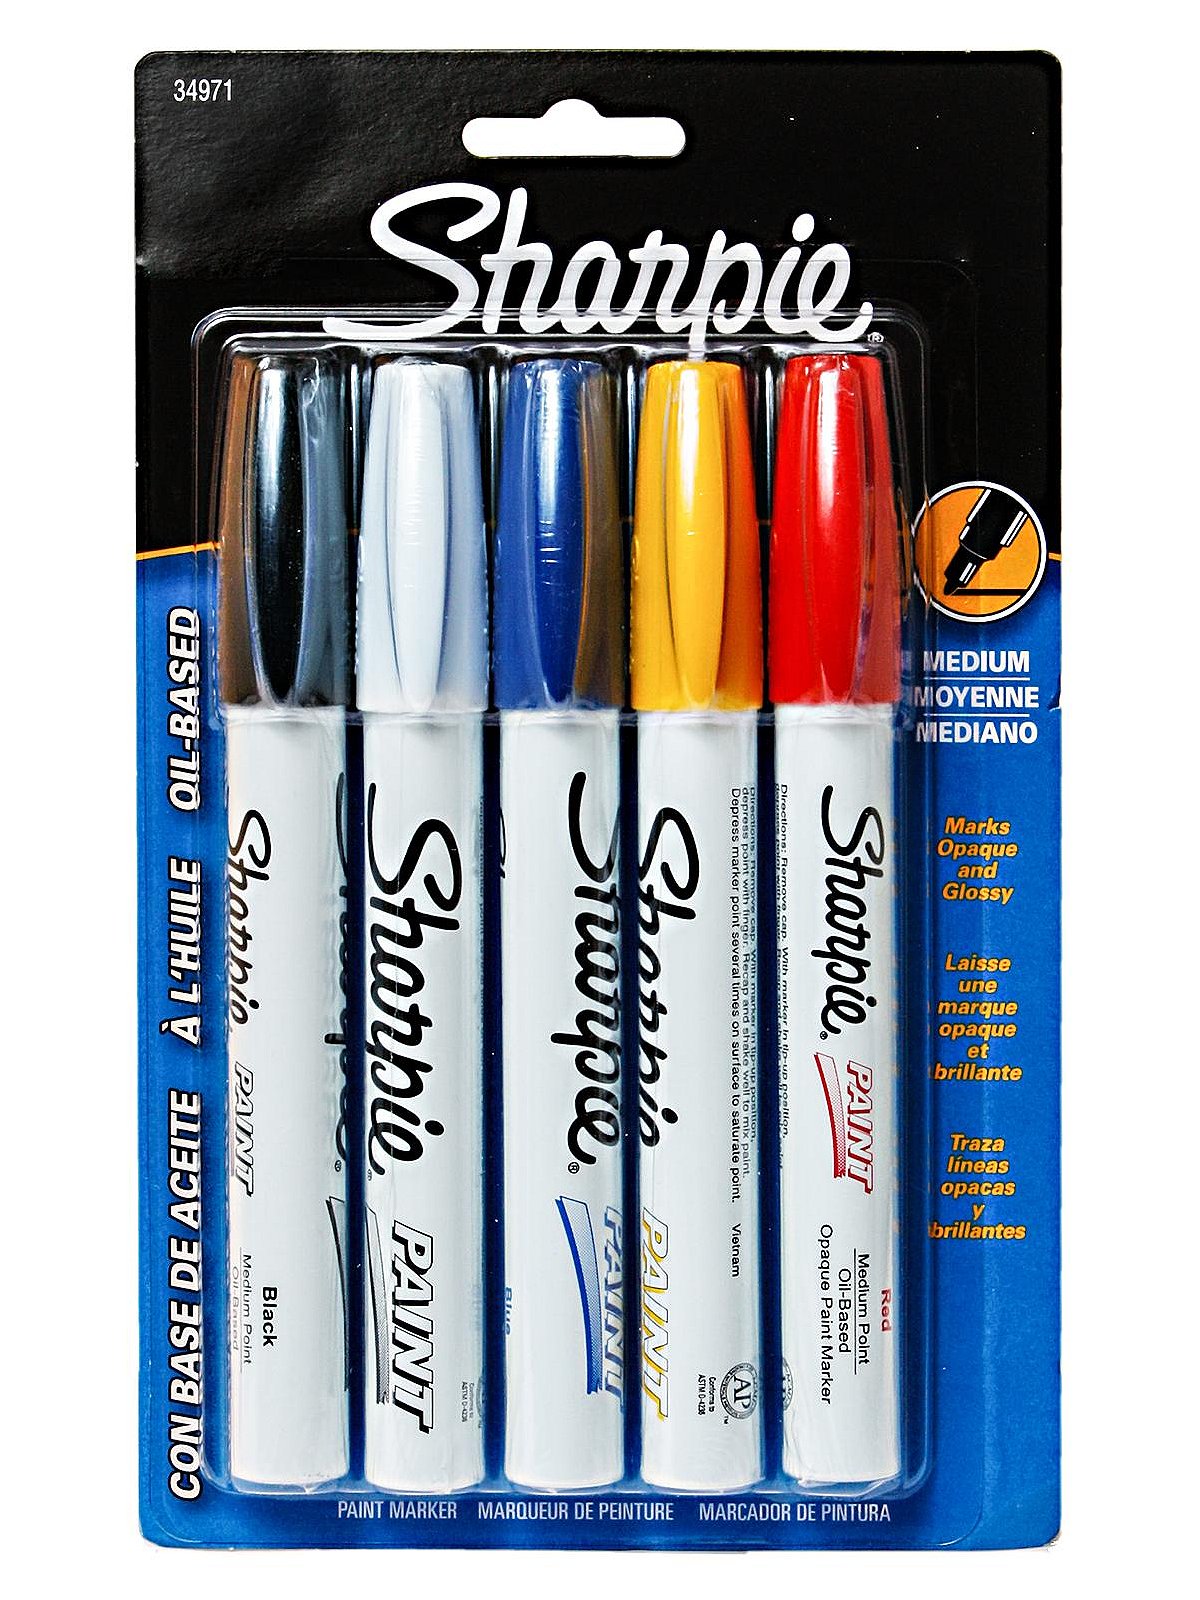 Sharpie Oil-Based Paint Markers, Medium Point - 5 / Pack -Assorted